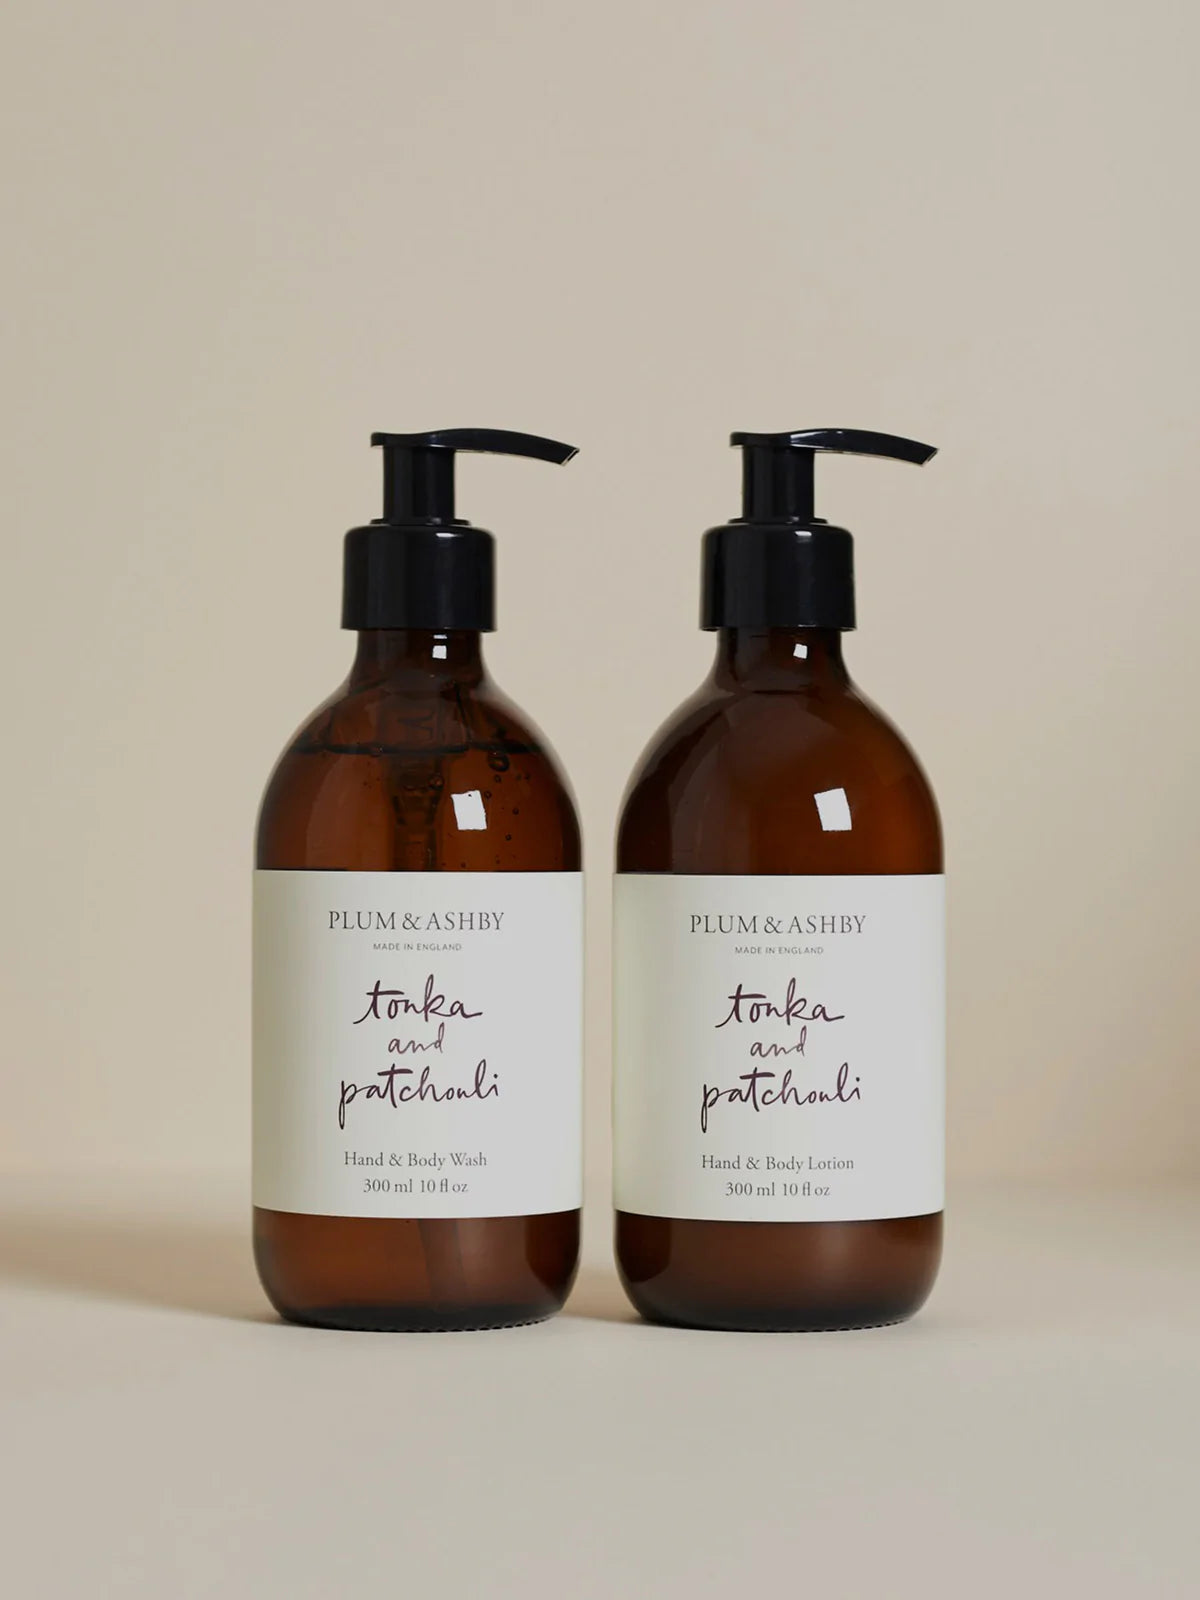 Plum & Ashby Hand and Body Wash : Tonka and Patchouli